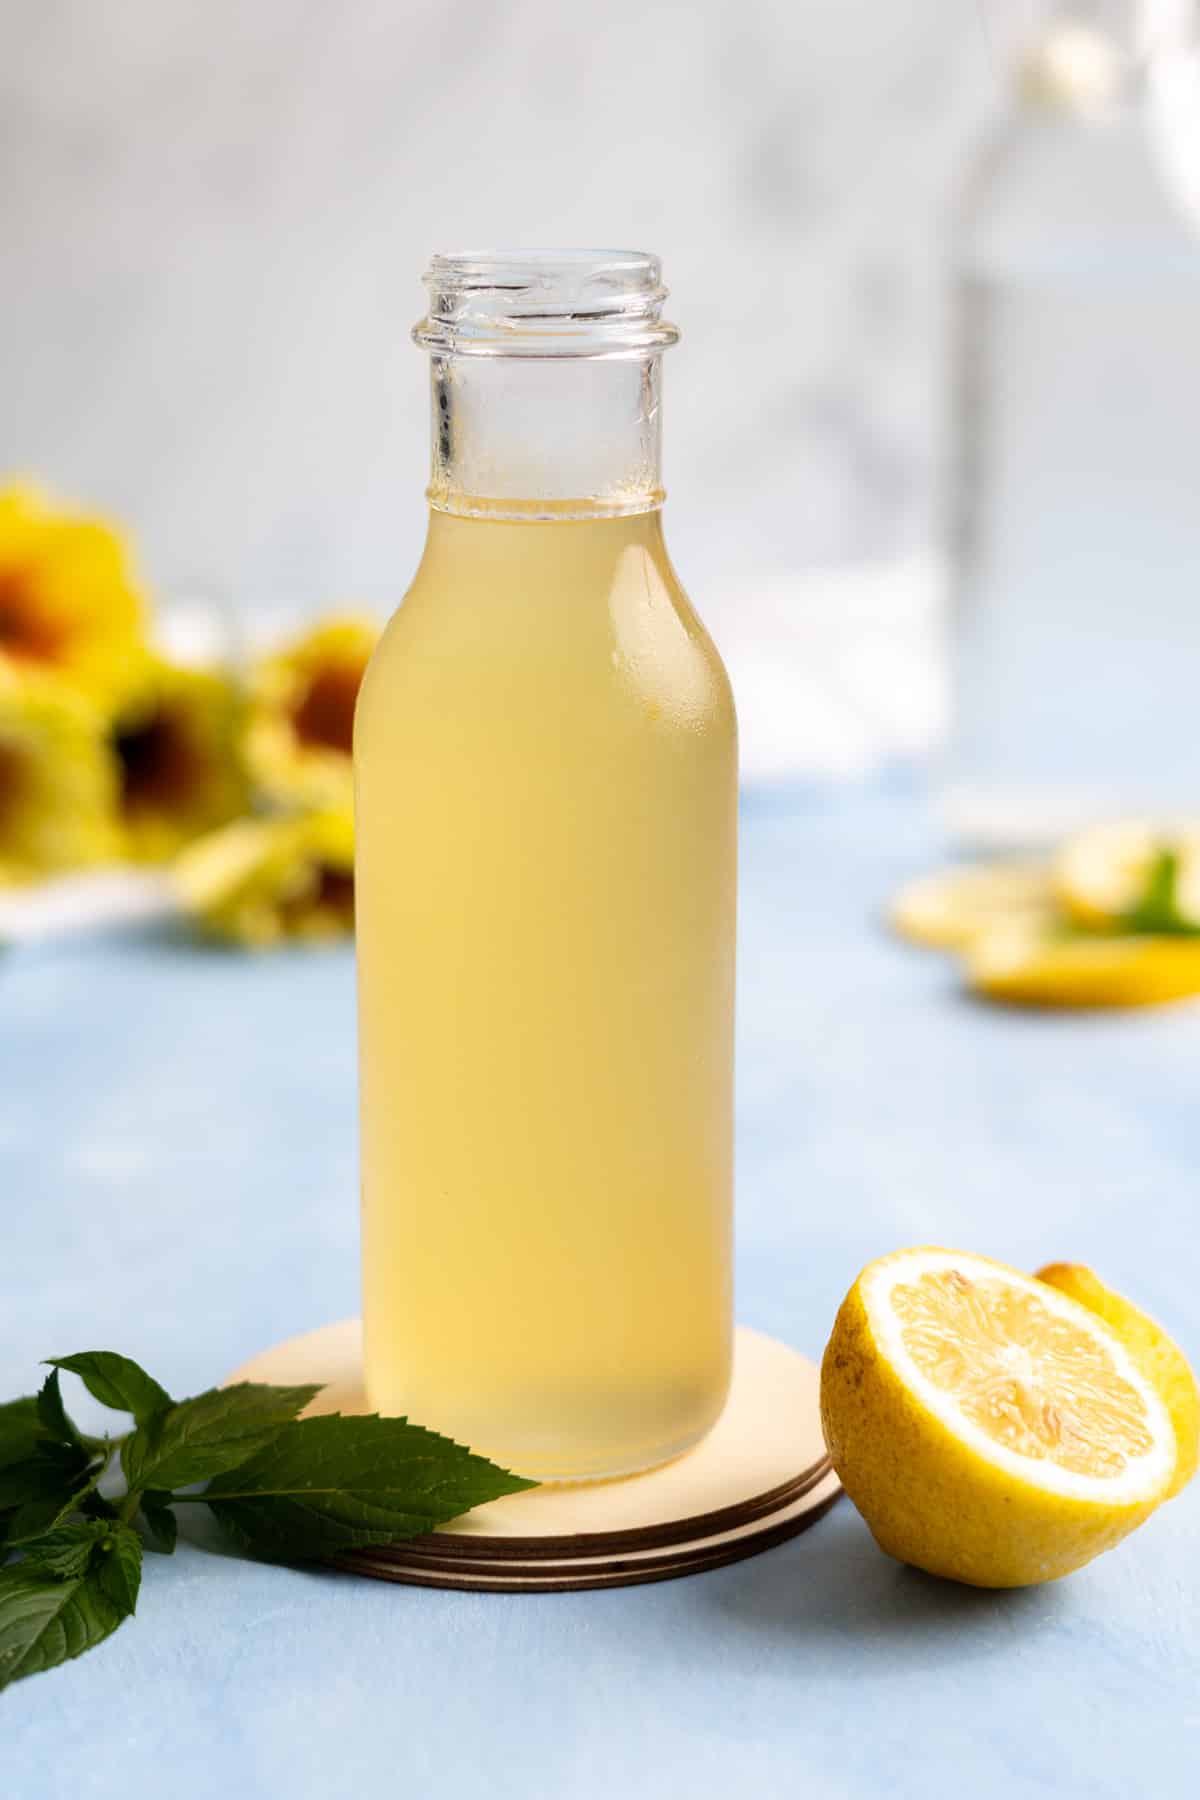 Chilled bottle of lemon syrup with mint leaves and fresh lemons.